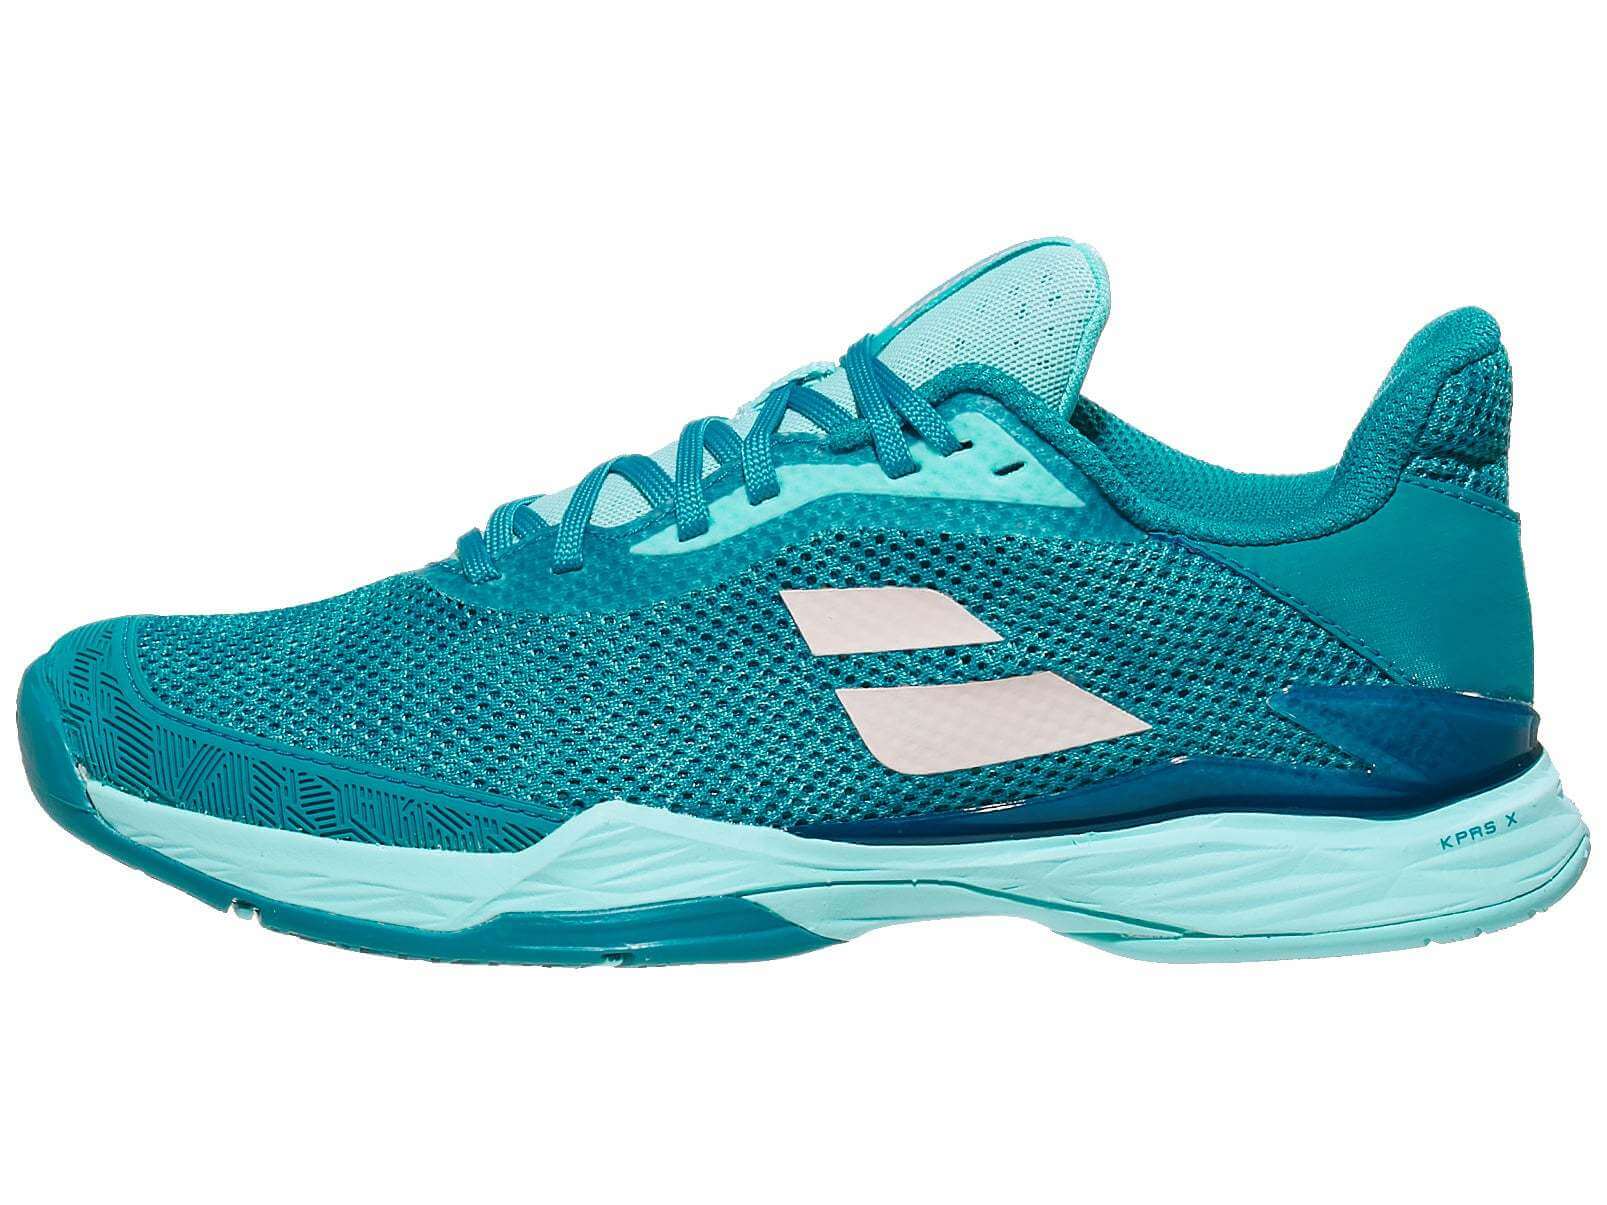 Babolat Jet Tere In-depth Review For Both Men and Women